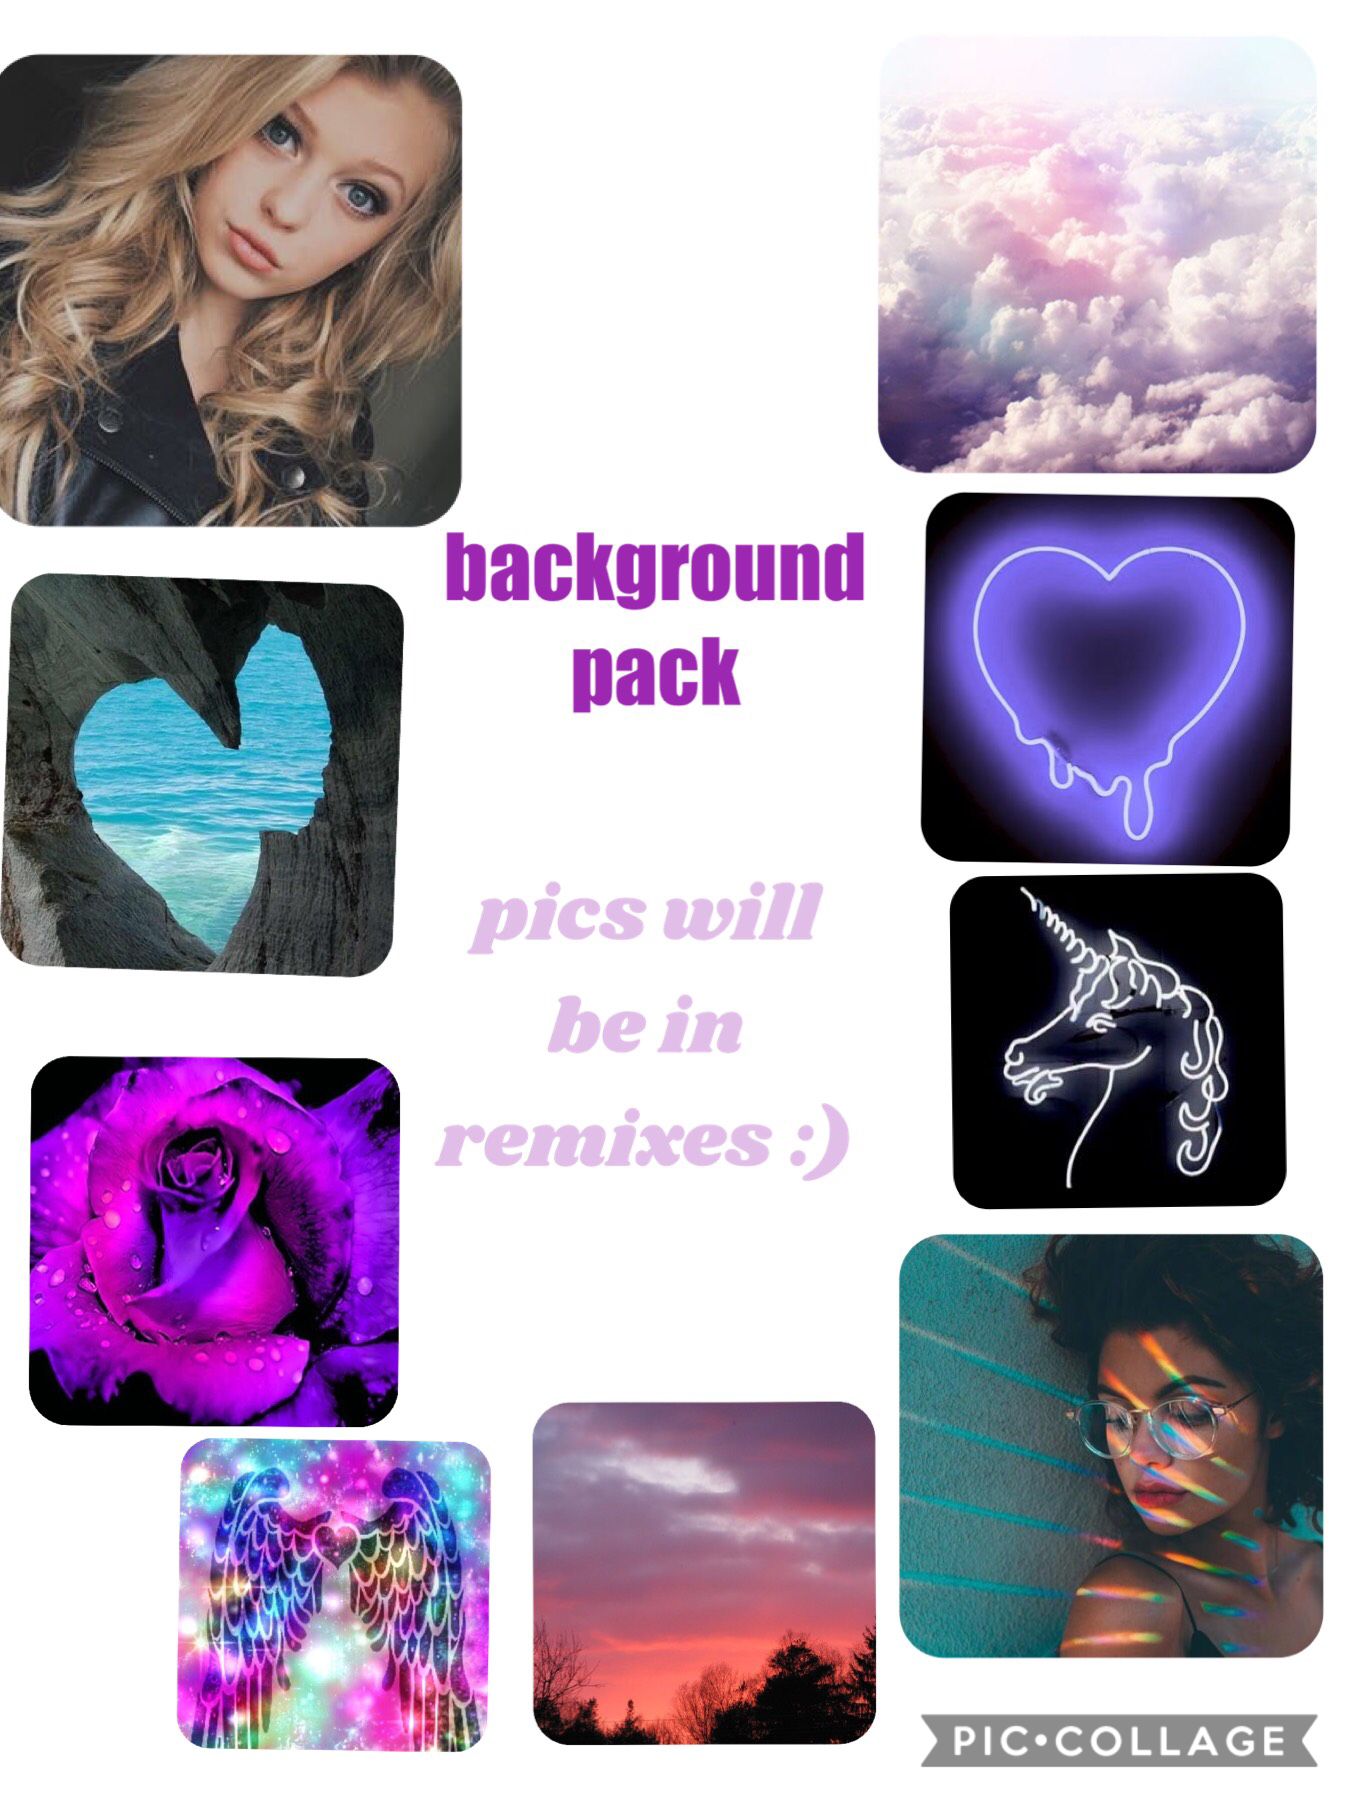 BACKGROUND PACK